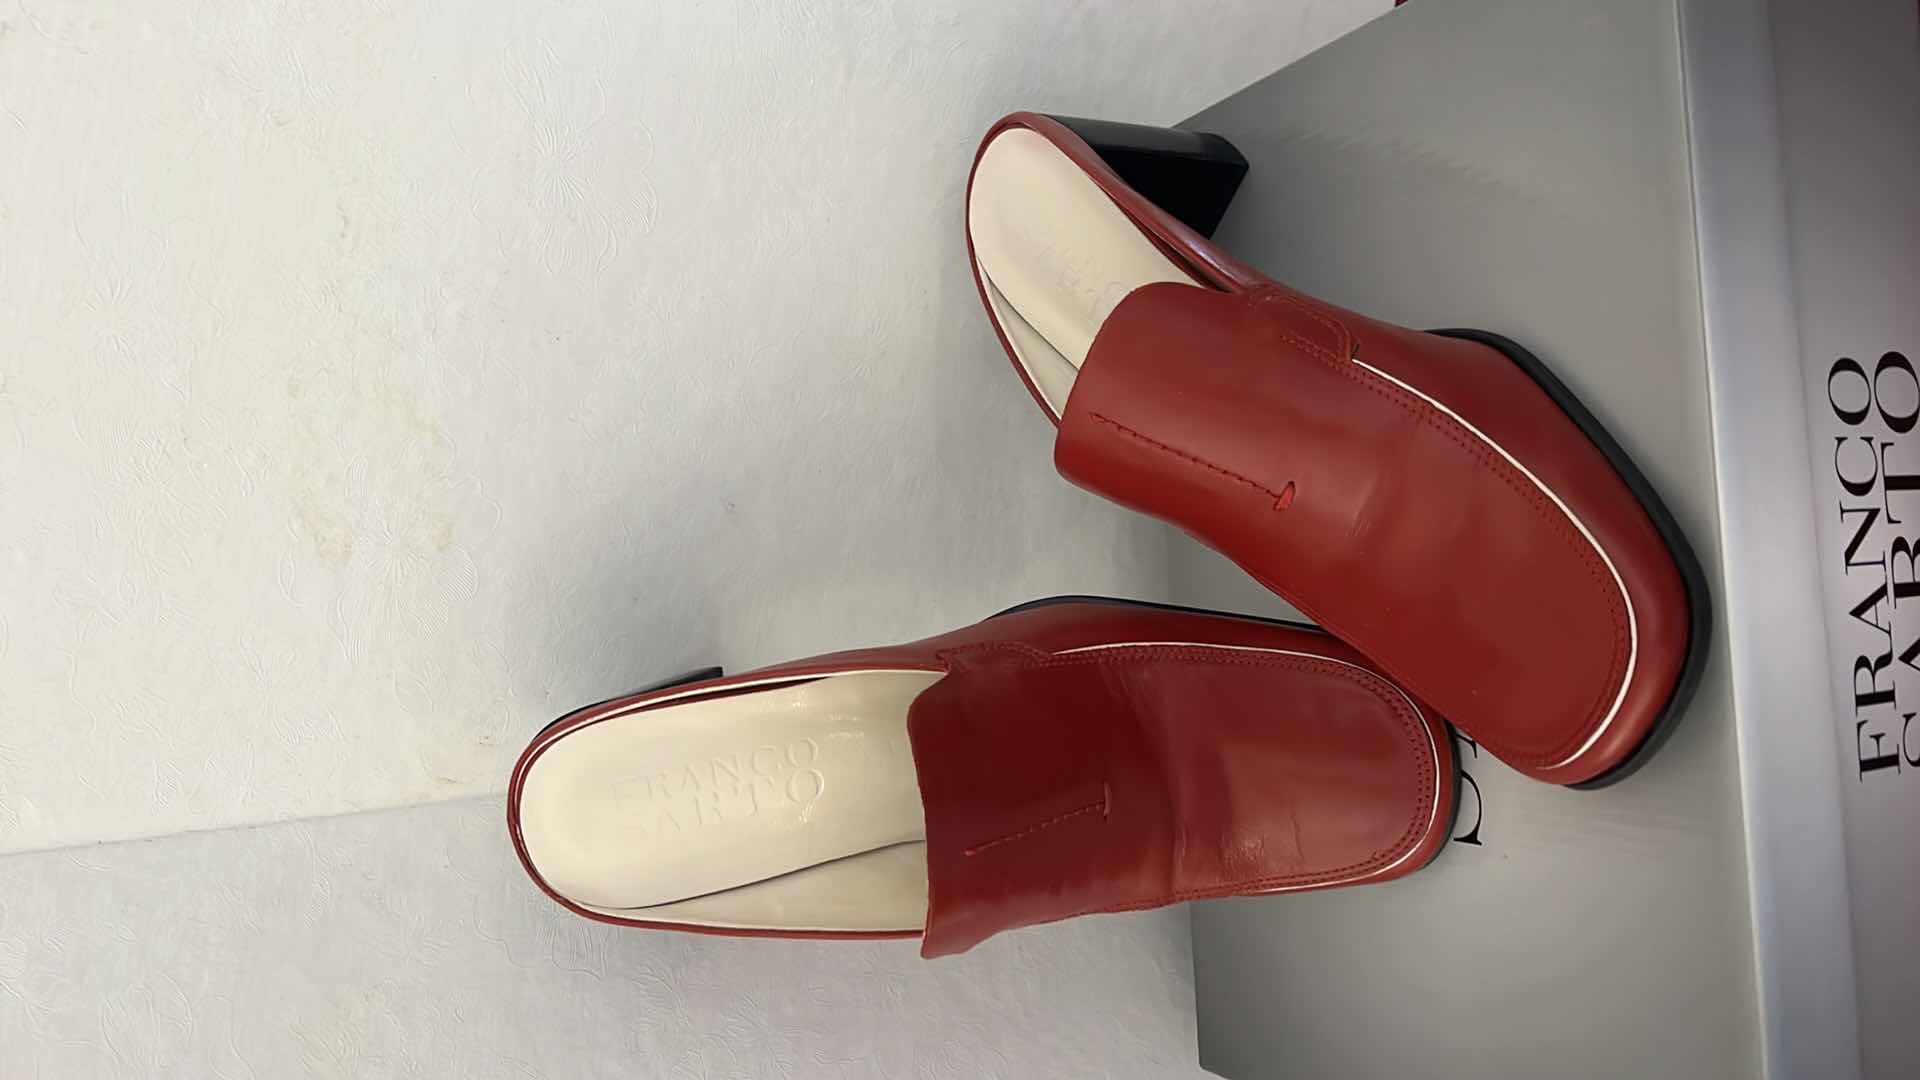 Photo 4 of RED LADIES “FRANCO SARTO” SLIDE SHOES (SIZE 7M)